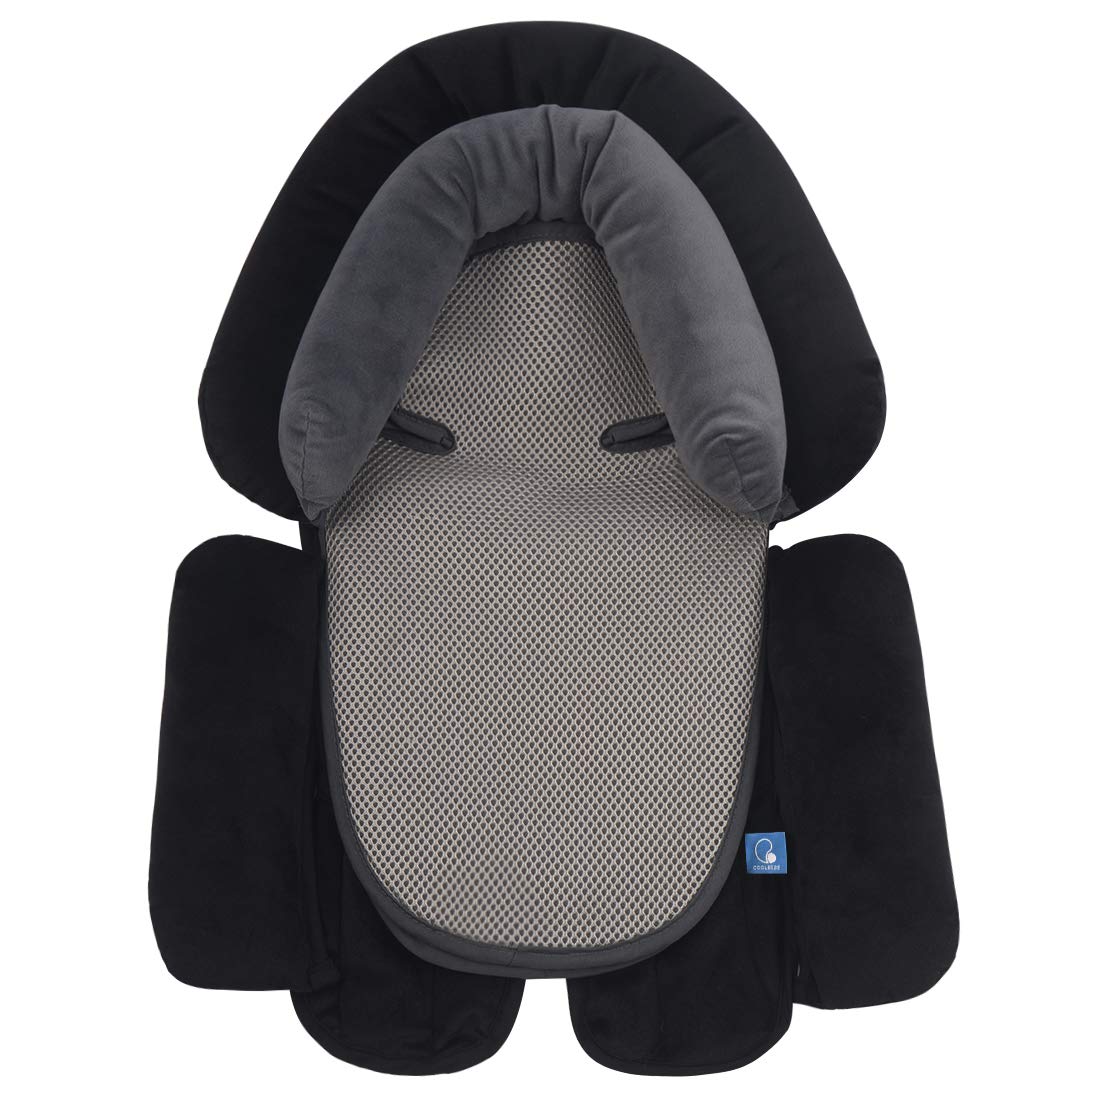 COOLBEBE 3-in-1 Infant Car Seat Pillow Insert